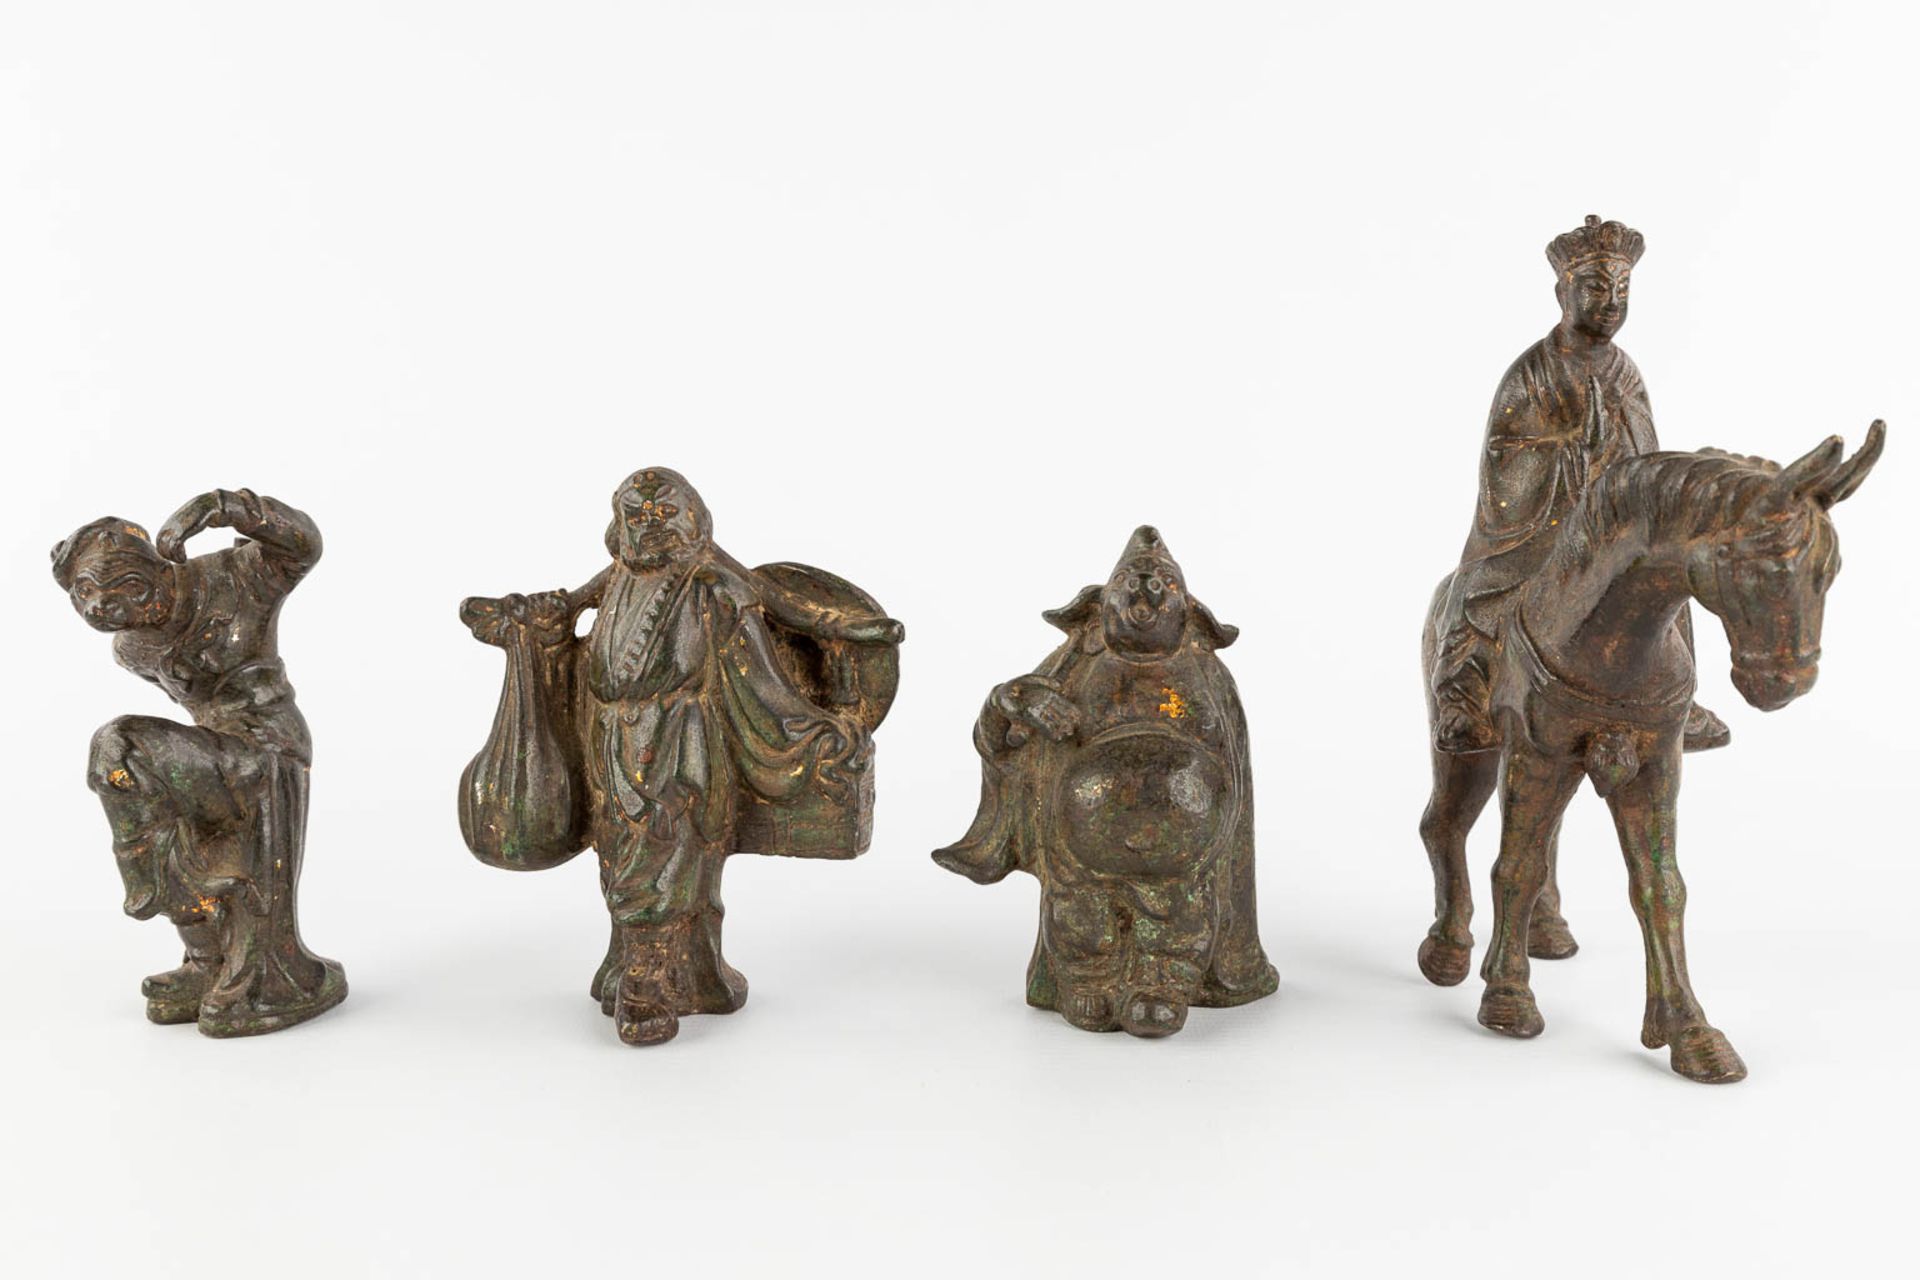 4 Chinese figurines, made of bronze. (L:7 x W:18 x H:18 cm) - Image 3 of 12